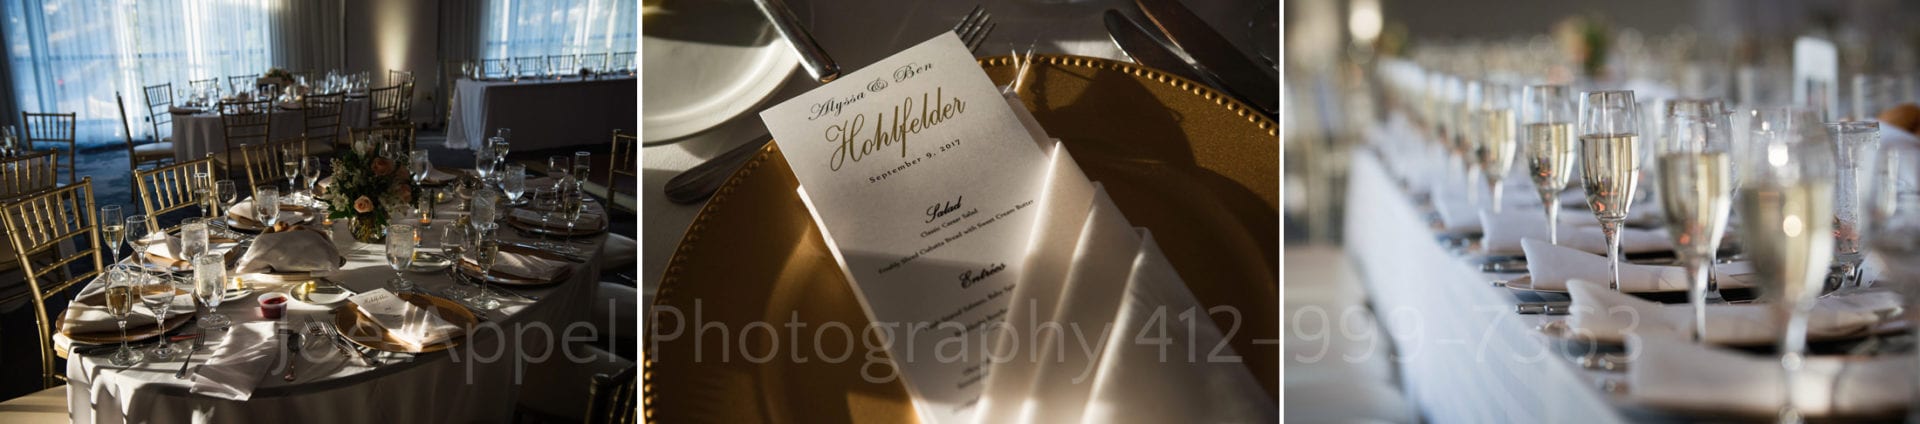 white and gold table settings with champagne glasses and menus